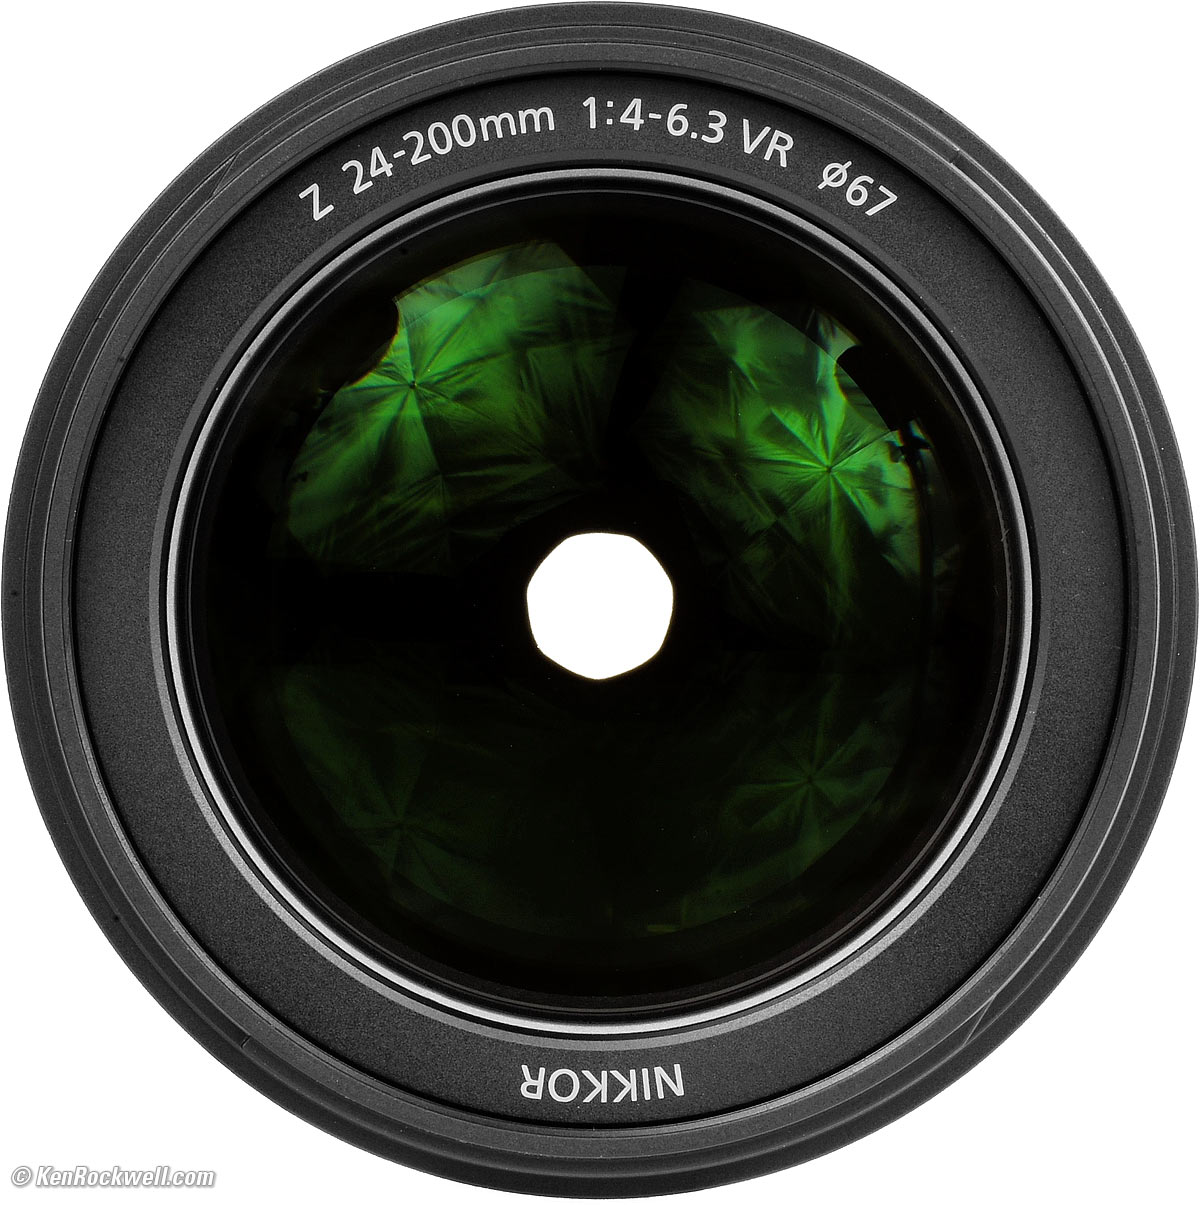 Sample Z Nikon by Review Images Rockwell Ken & 24‑200mm VR